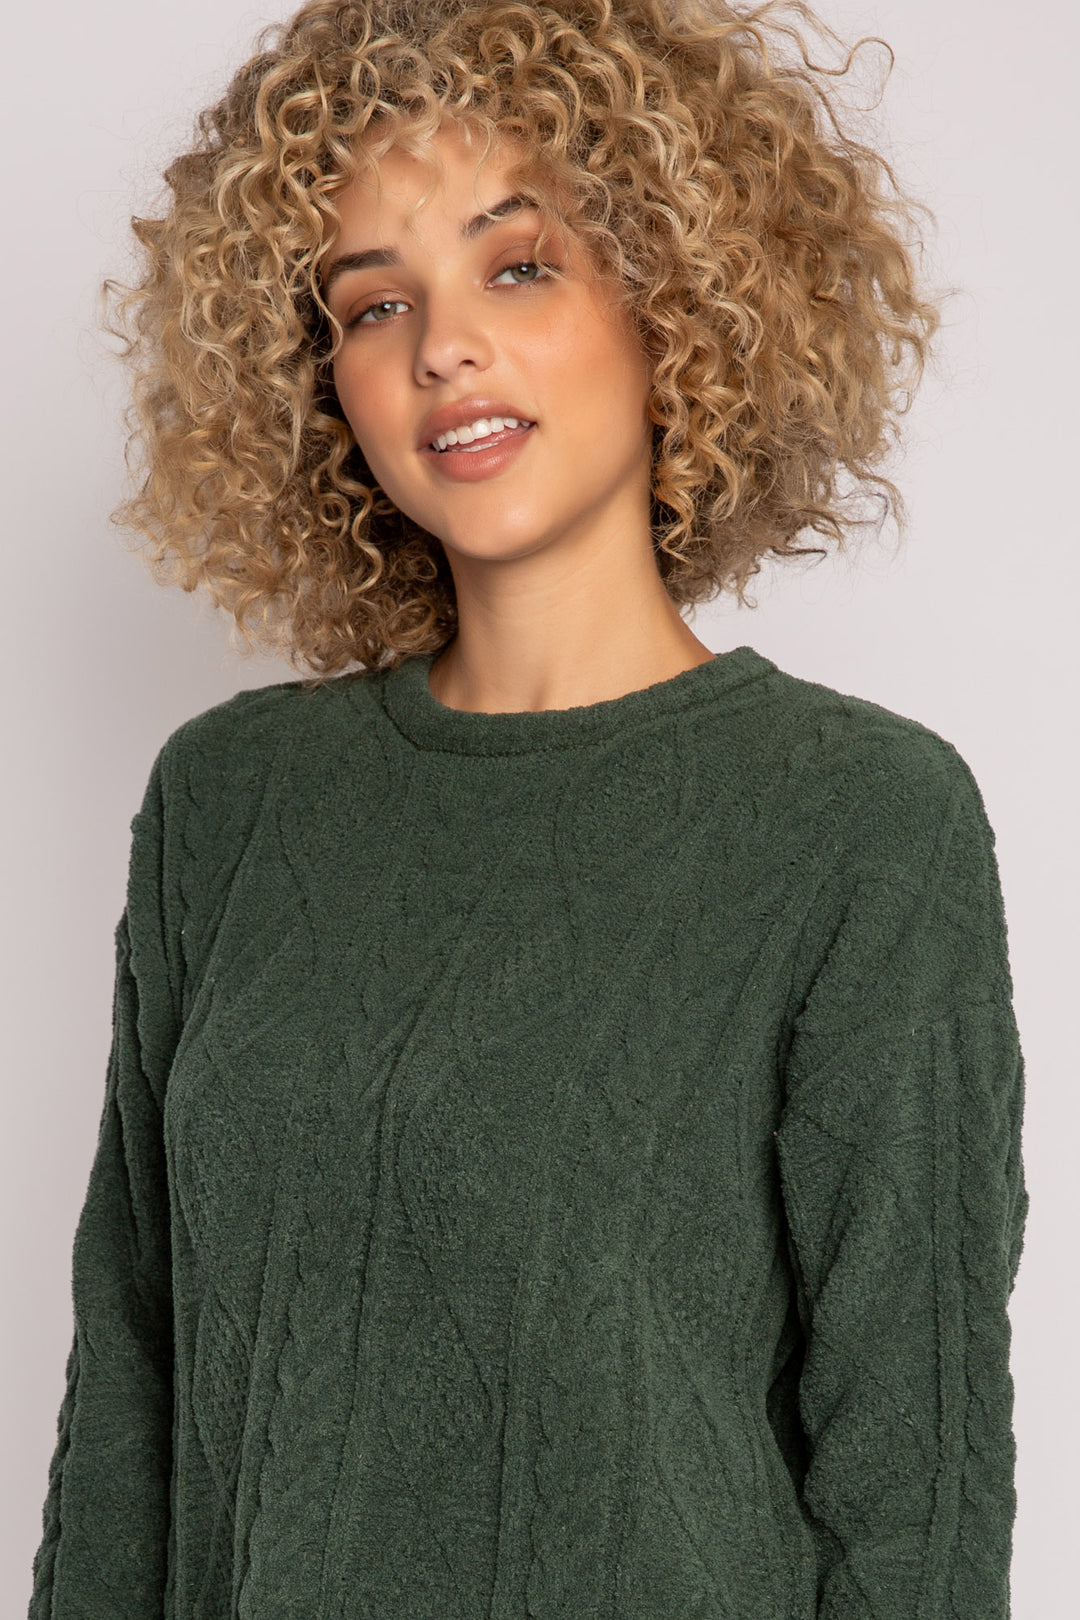 Long sleeve sweater in dark green chenille knit with cable pattern. Relaxed fit with rib cuffs/hem. (7257679396964)